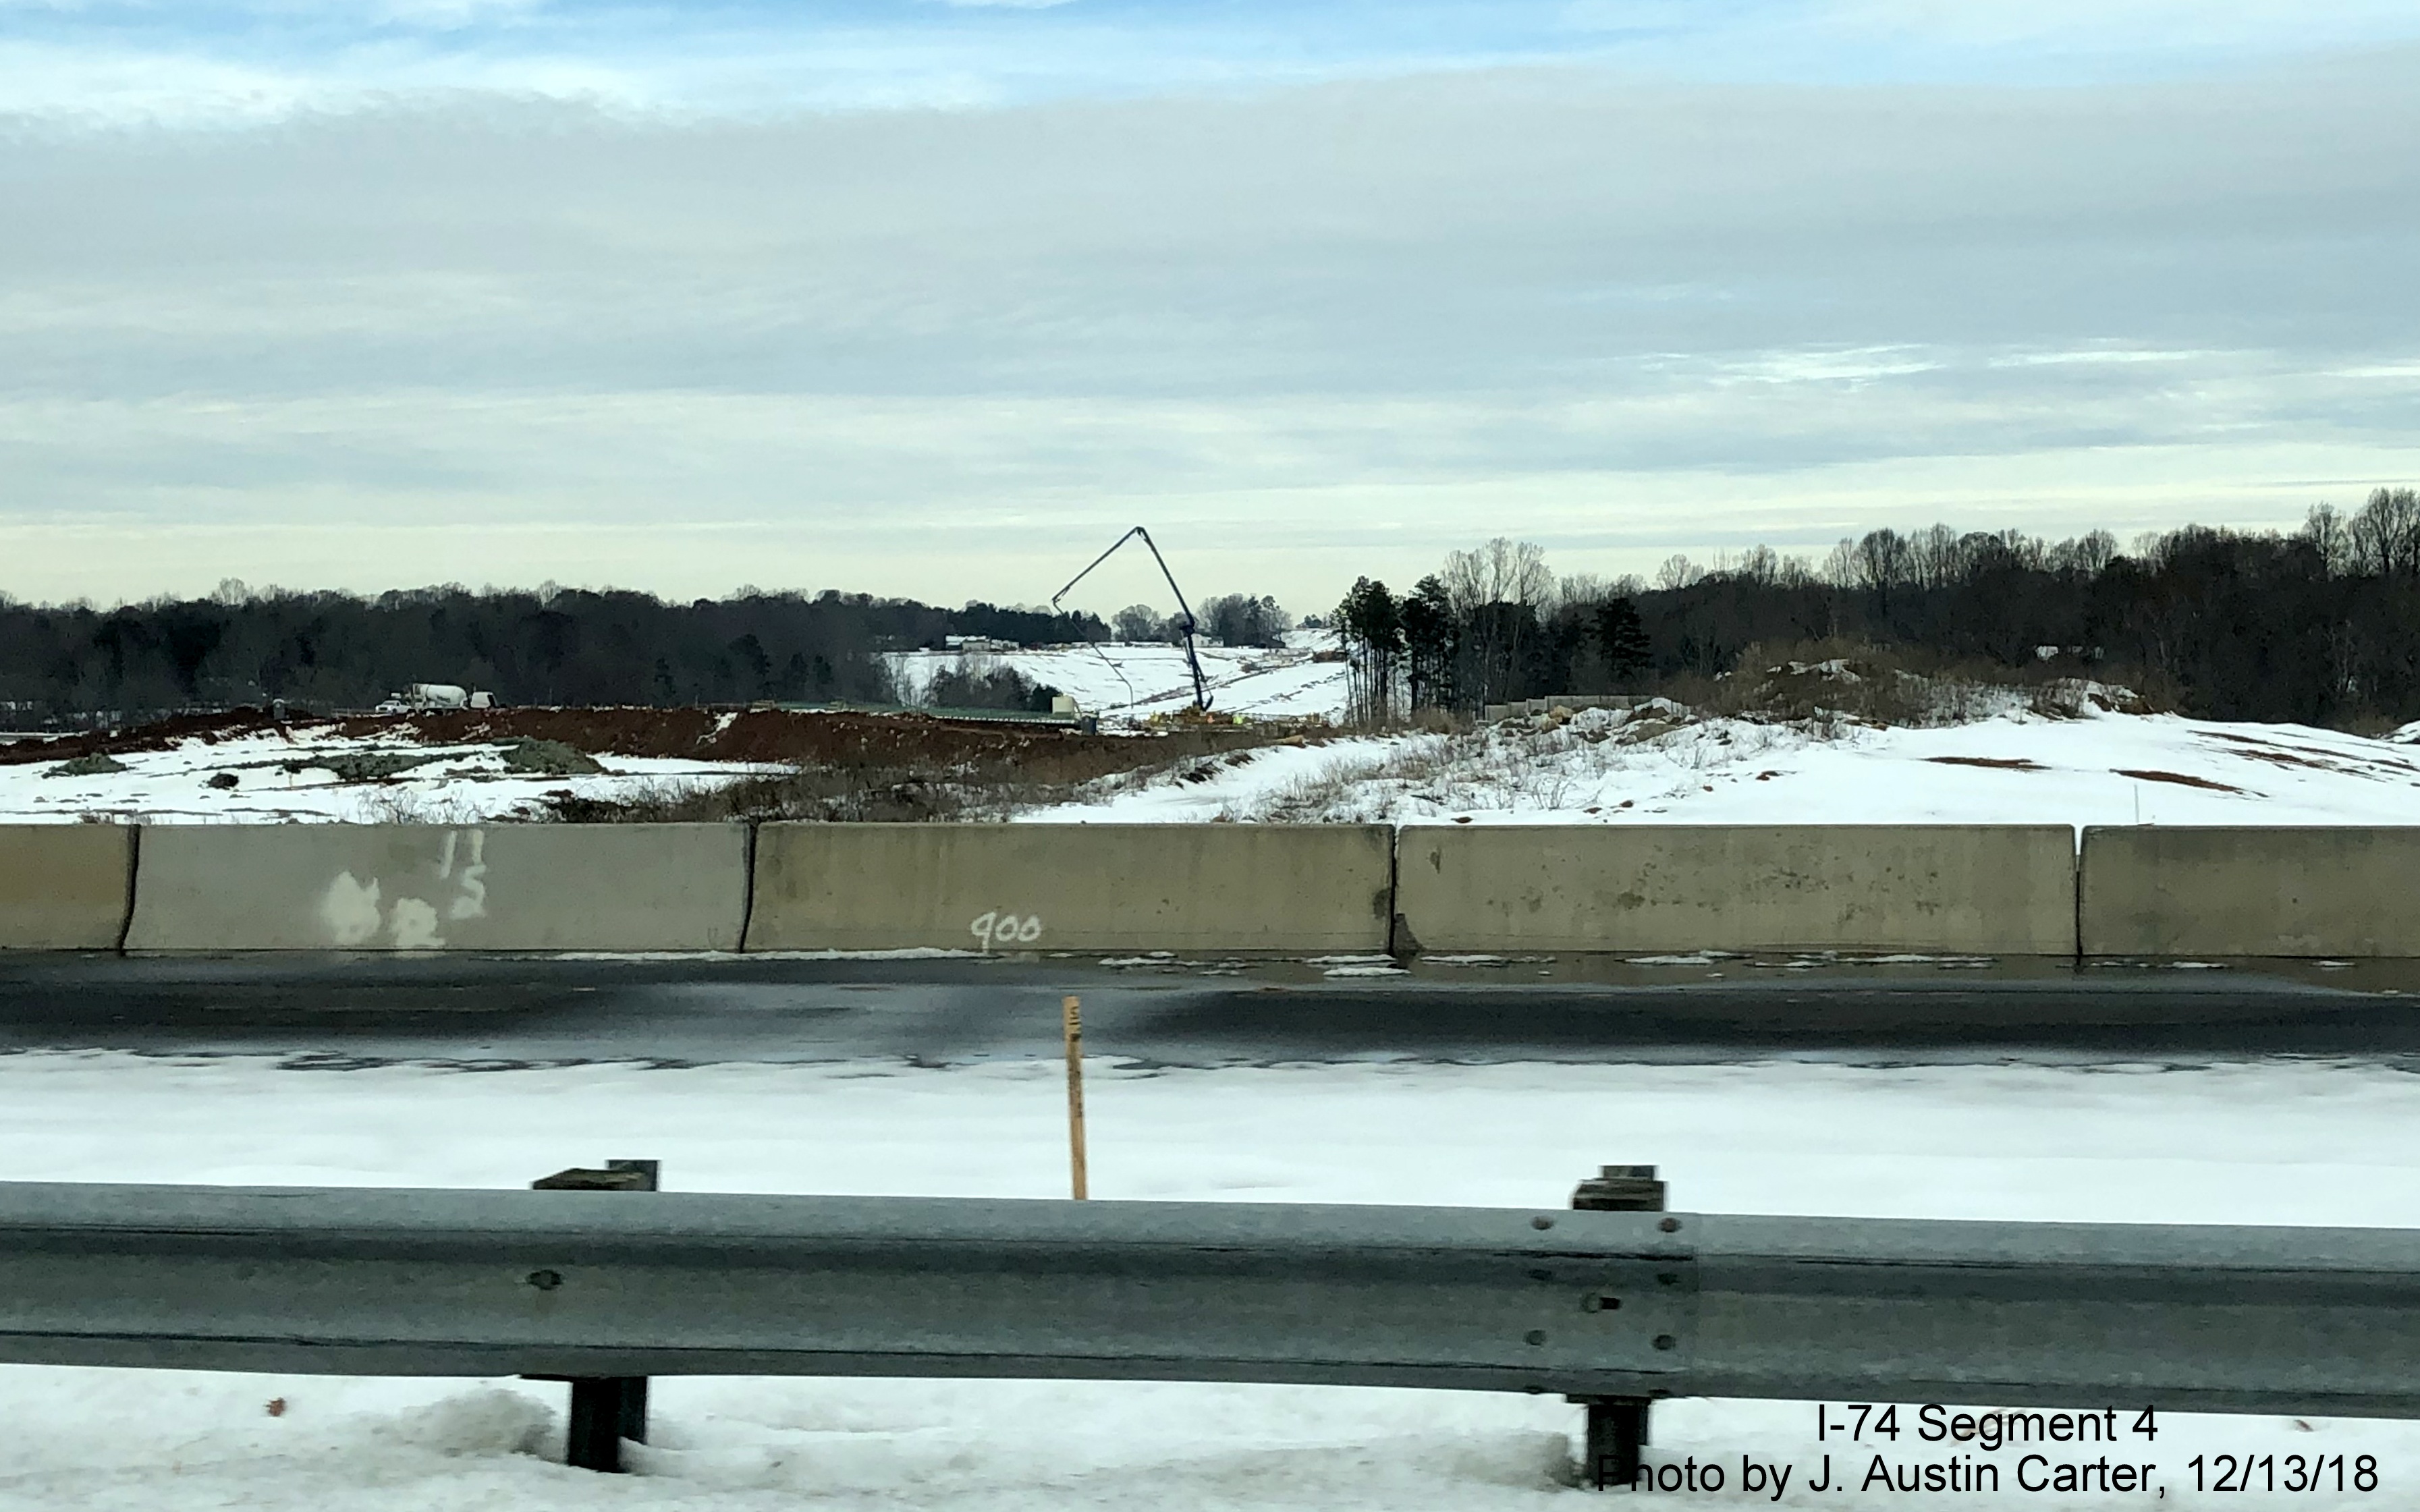 Image of Future I-74/Winston-Salem Northern Beltway lanes being constructed north of Business 40, by J. Austin Carter